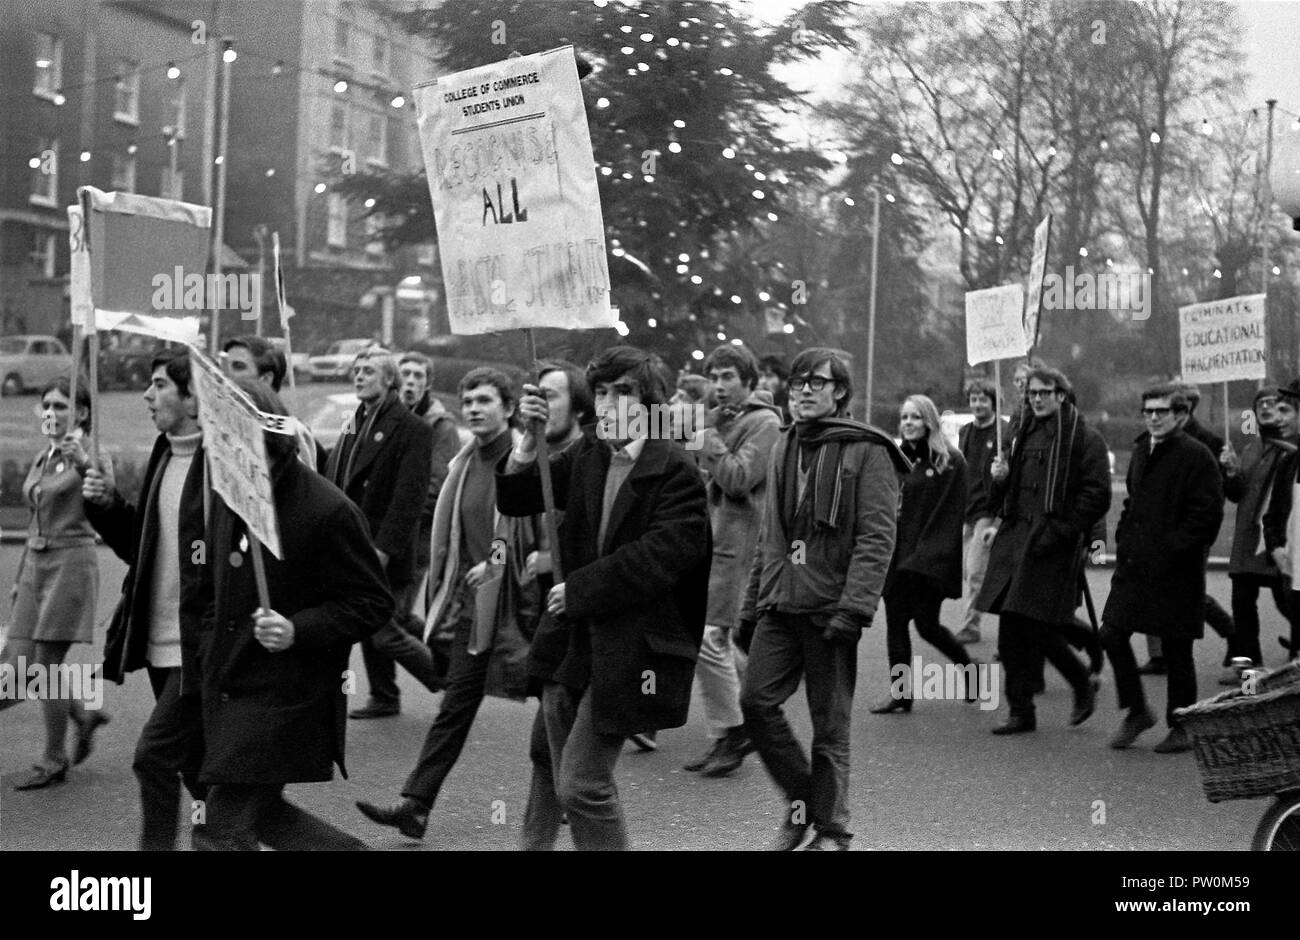 Student demonstrators march through Clifton to Bristol University’s Senate House administrative building at the start of a protest sit-in that began on 5 December 1968 and continued for 11 days.   The students were campaigning for a greater say in the running of the university.  They also wanted the university’s students’ union to be opened up to students from other educational establishments in the city. Stock Photo